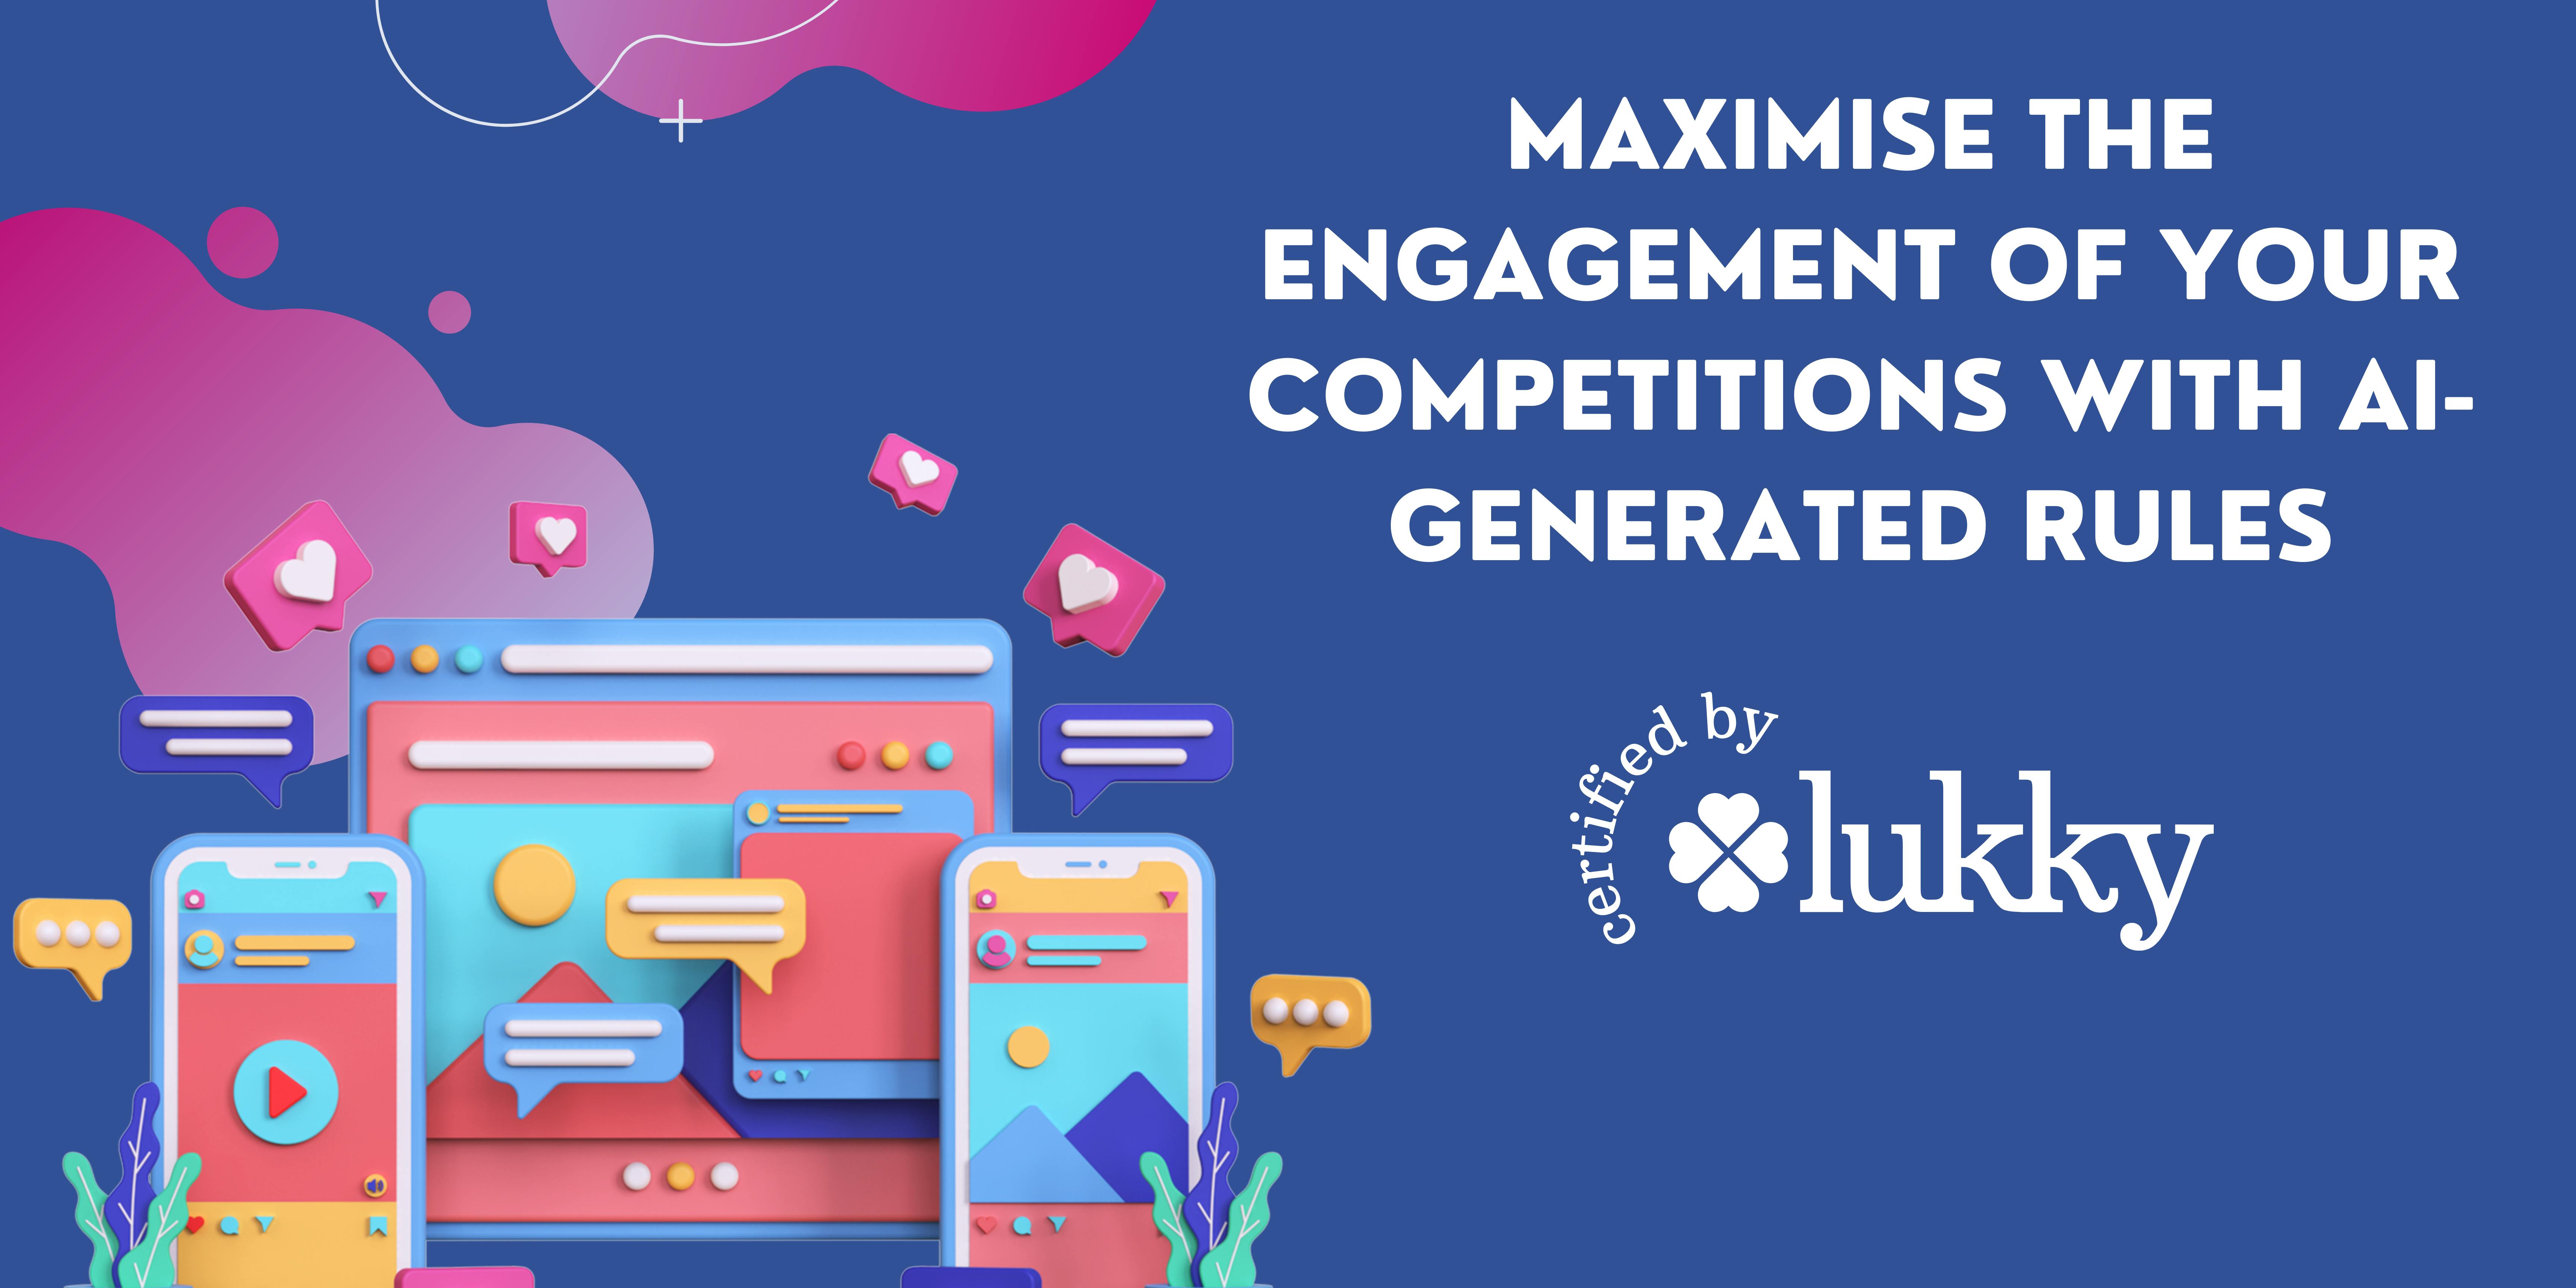 Maximise the engagement of your competitions with AI-generated rules